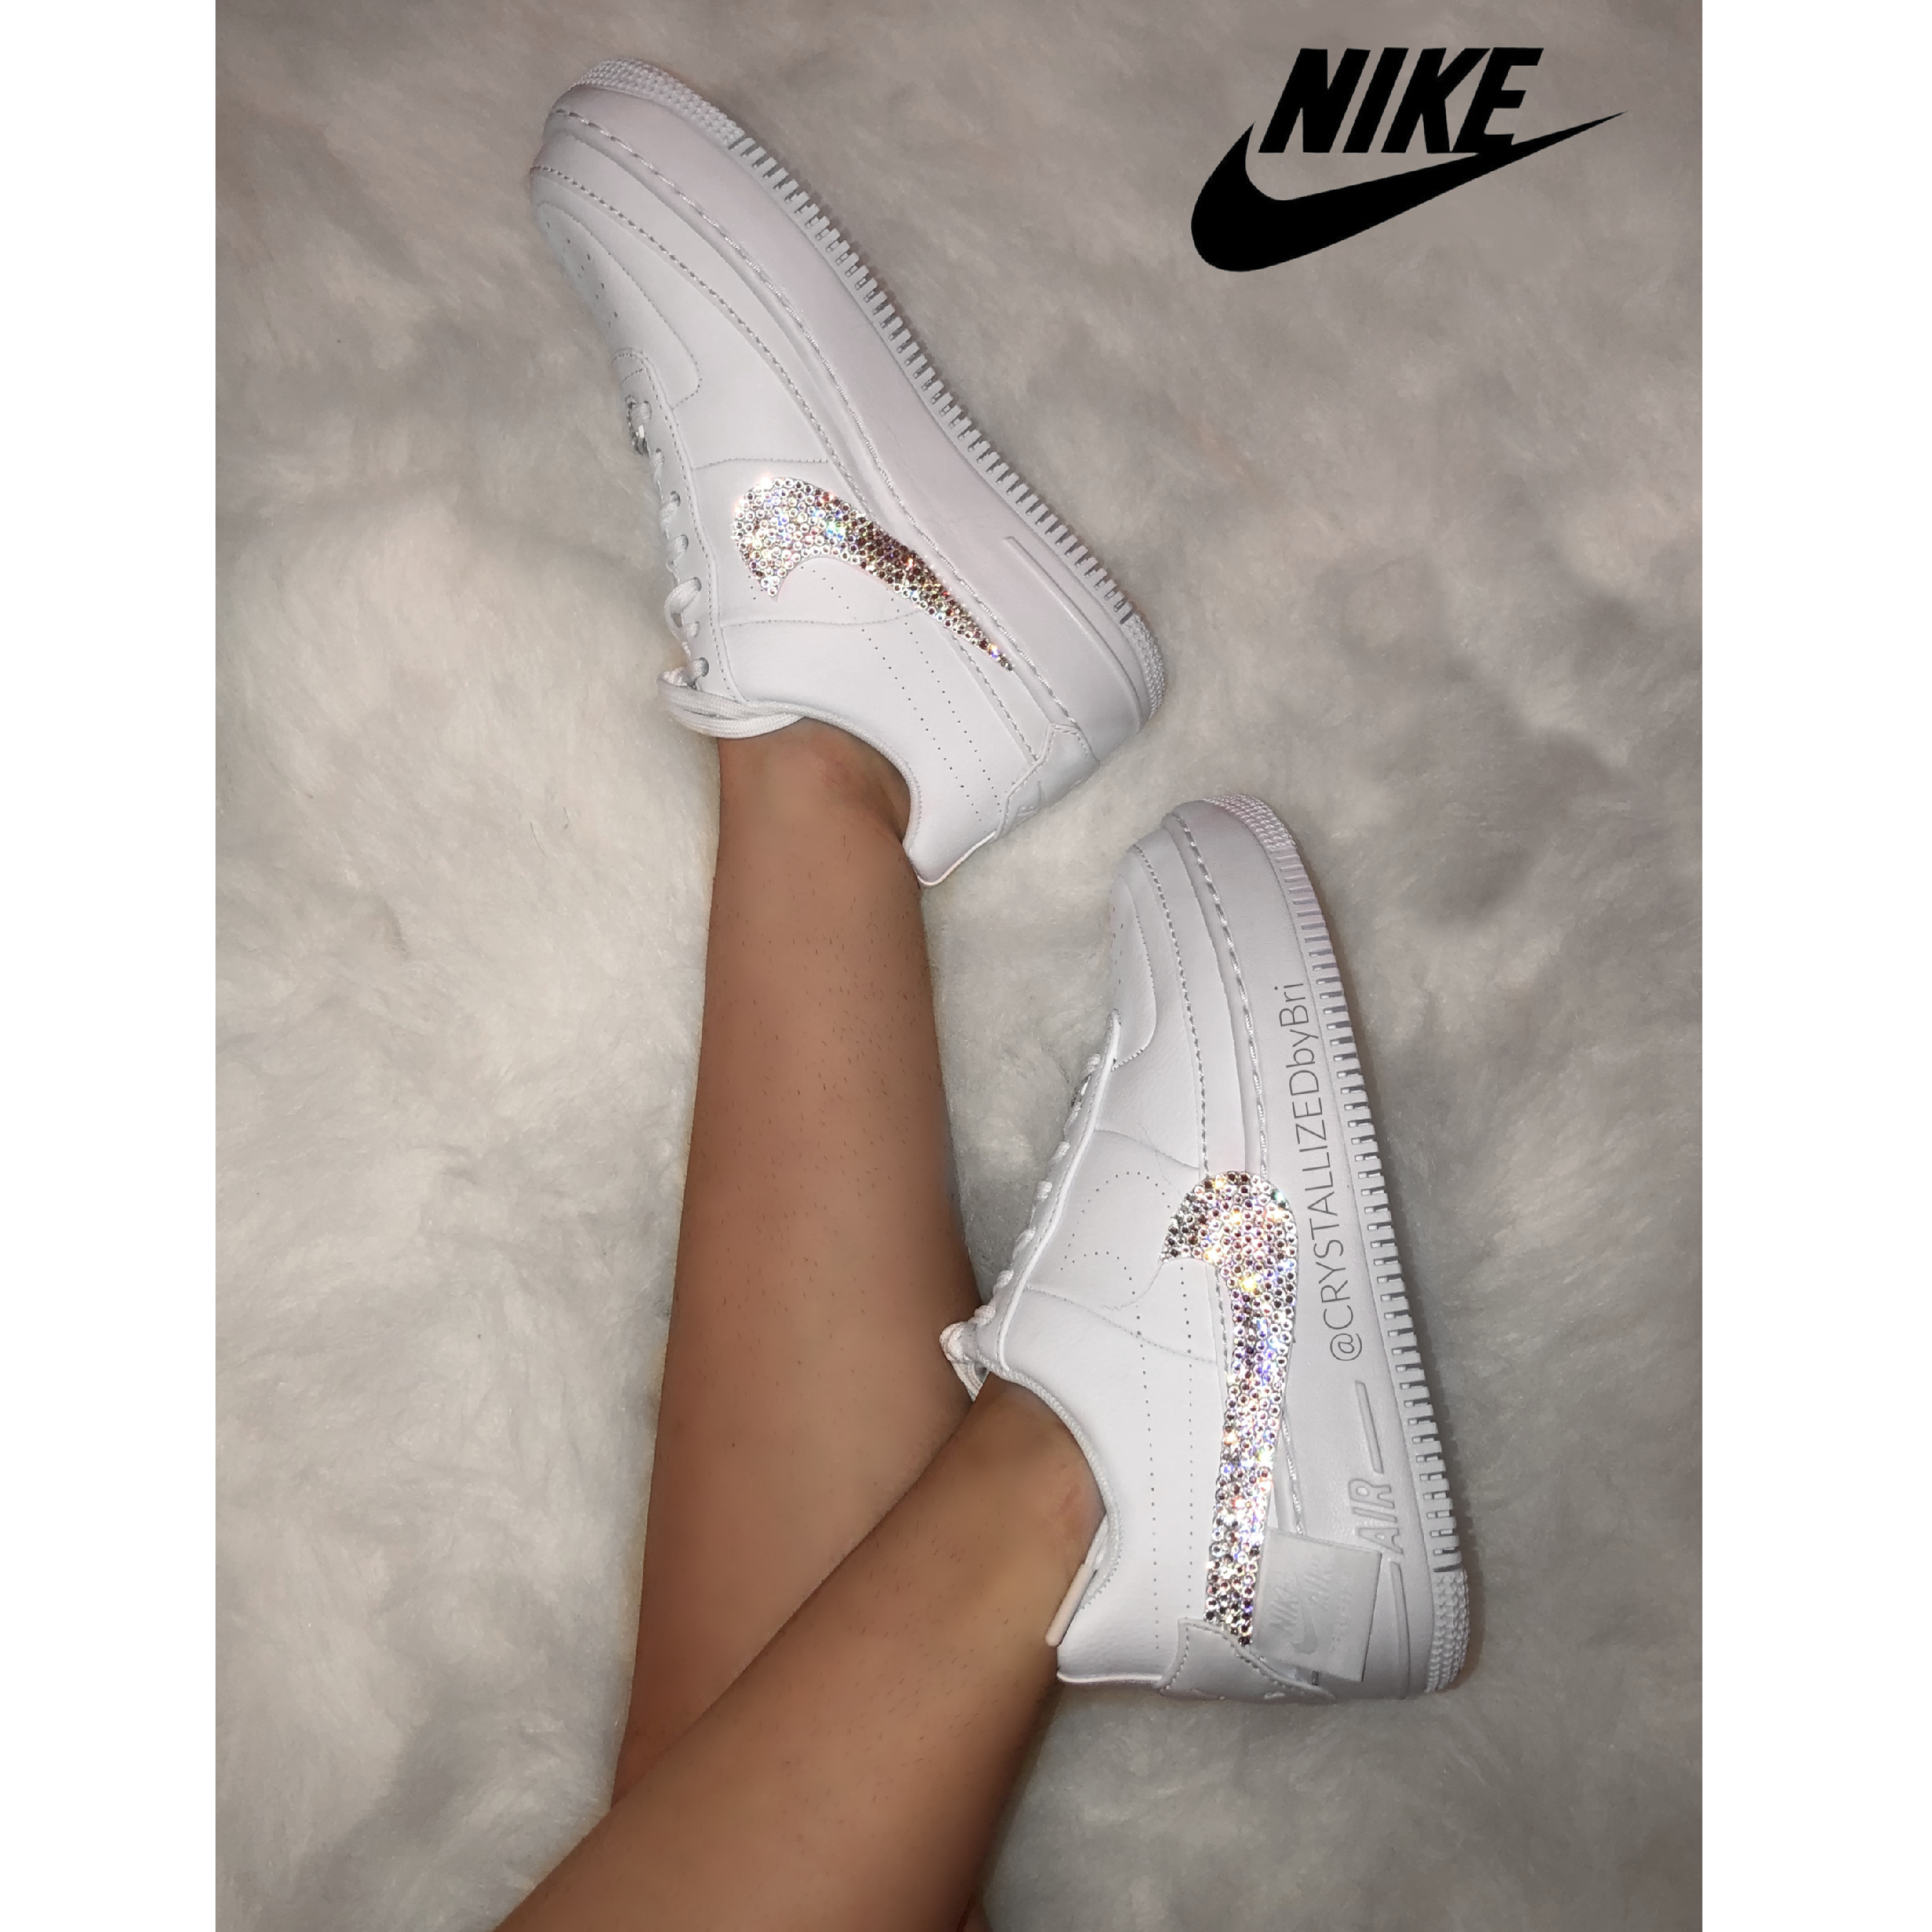 Aubergine Wanten Stralend Buy Custom Nike Crystallized Air Force 1 Women's Sneakers Bling Genuine  European Crystals Bedazzled, made to order from CRYSTALL!ZED by Bri, LLC |  CustomMade.com